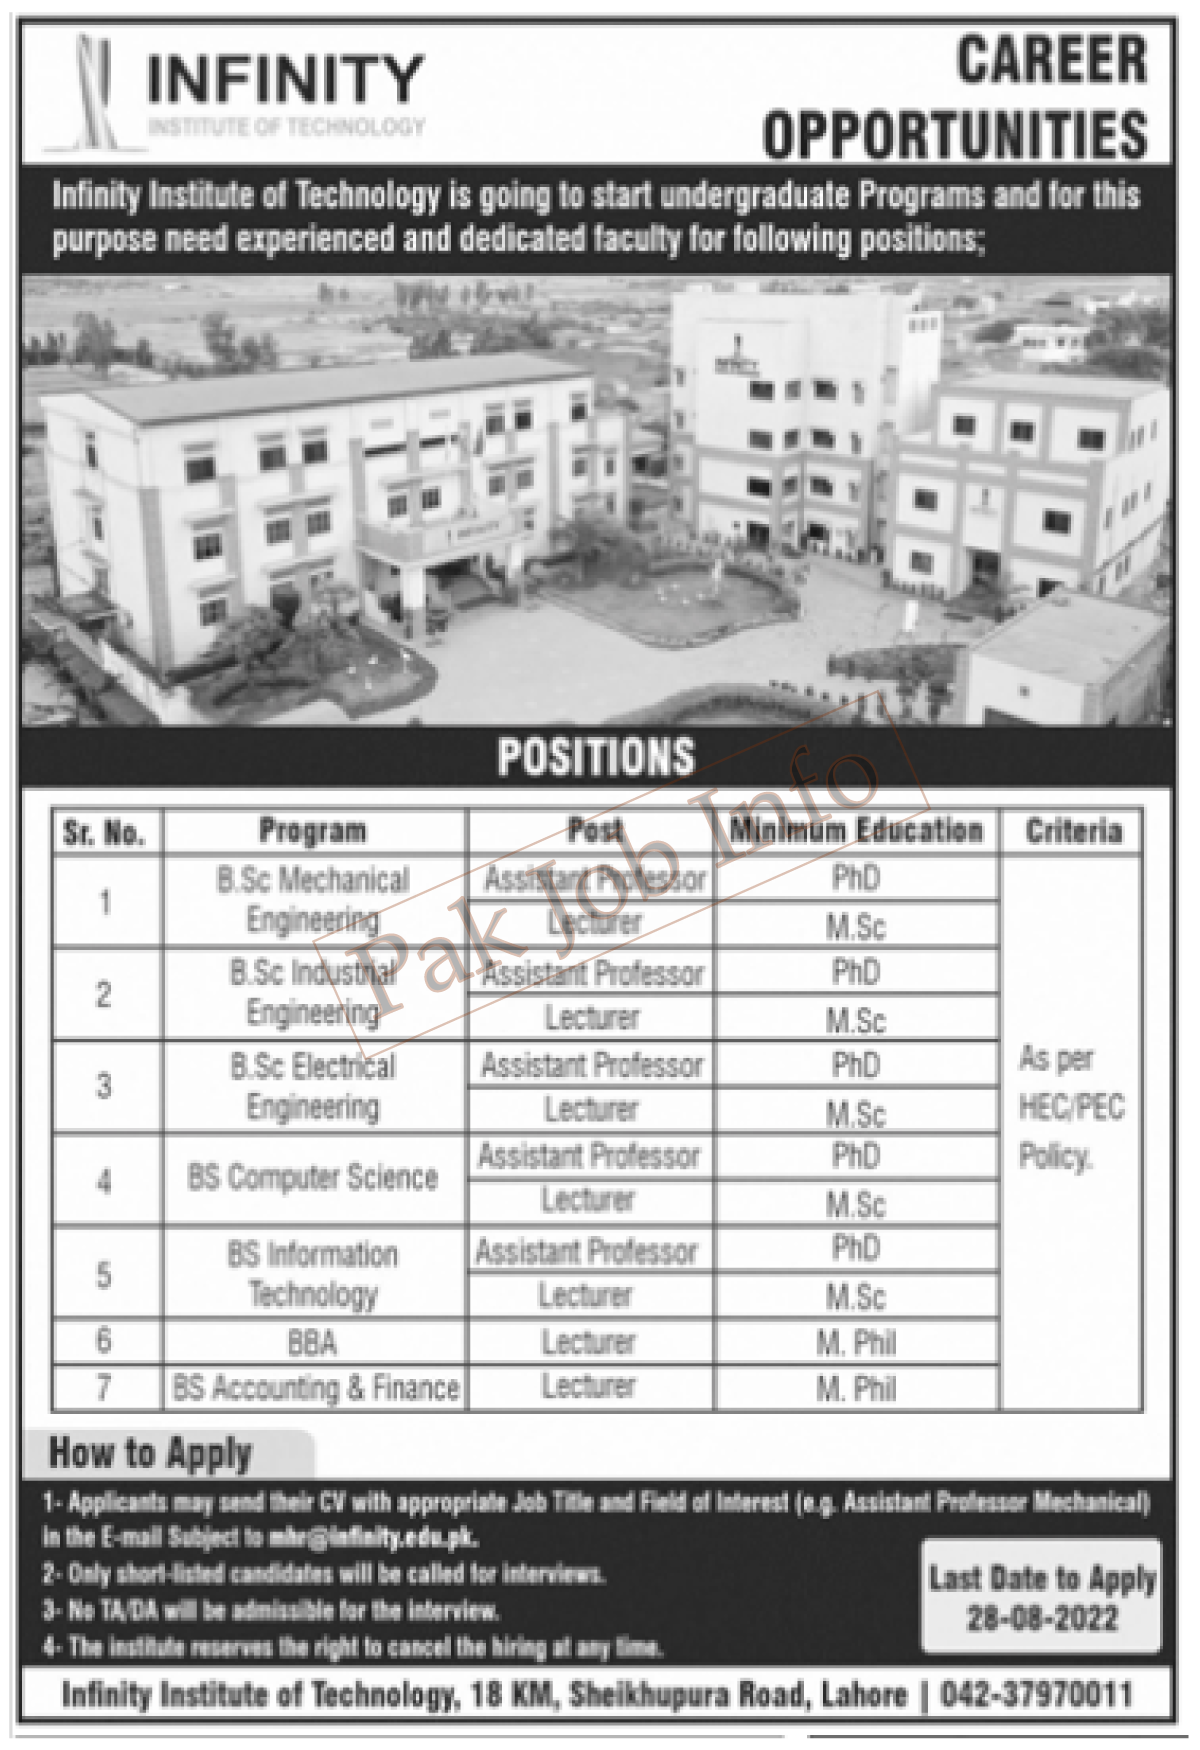 Infinity Institute of Technology Lahore August Jobs 2022,Assistant professor and Lecturer, Mechanical, Electrical, Industrical, Computer Science, BBA.